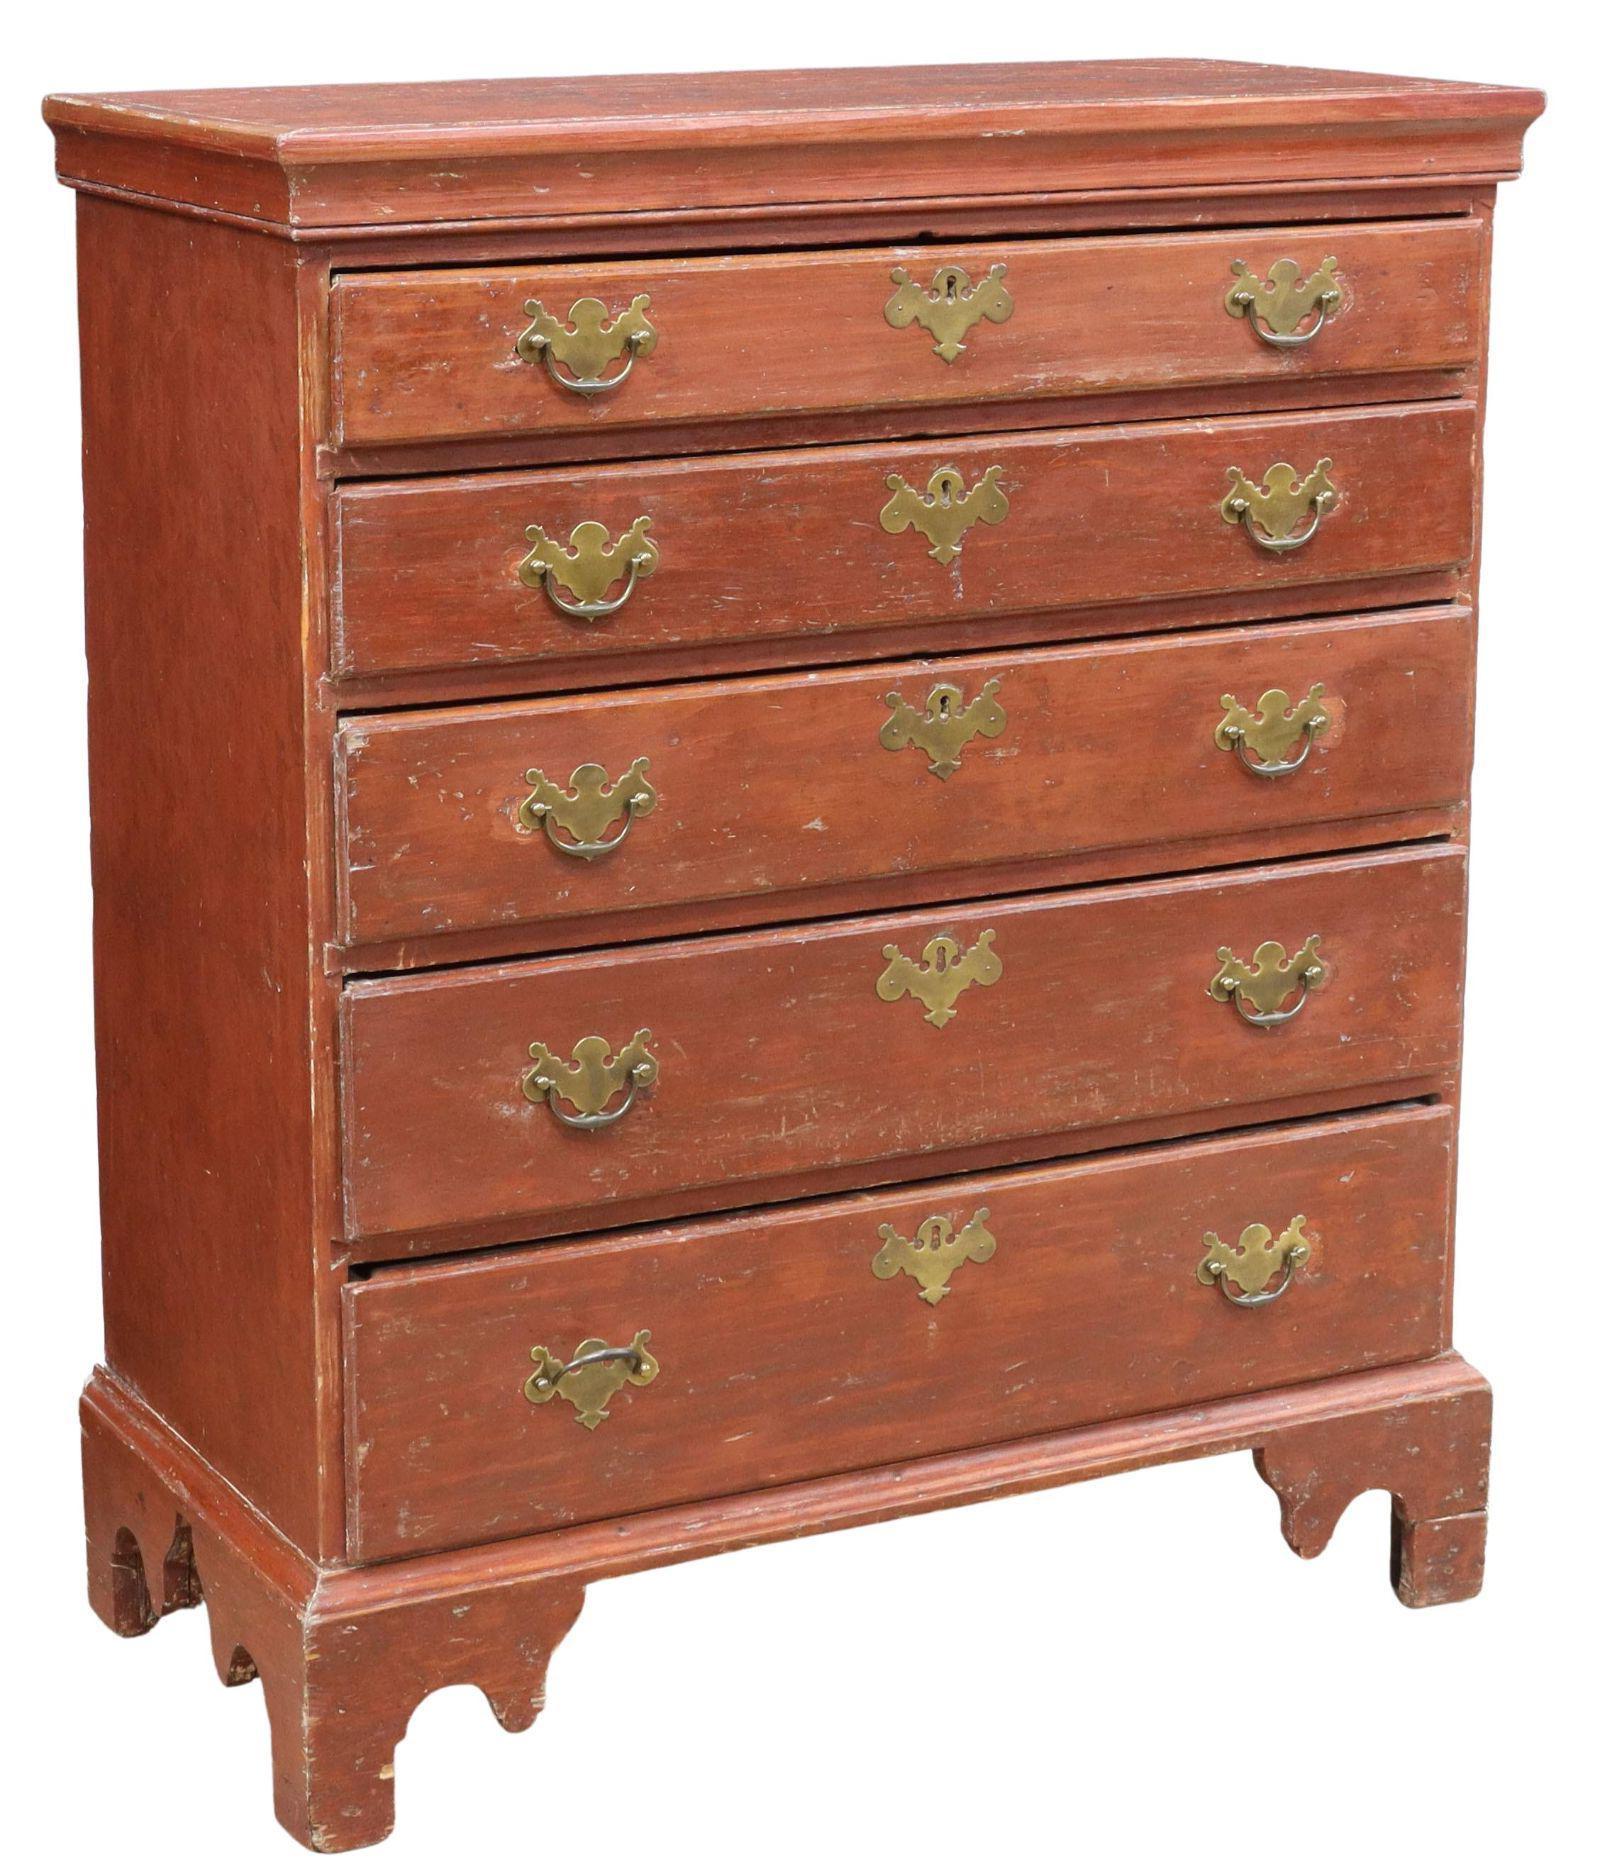 Antique American Chippendale Red-Painted Chest of Drawers, New England, 18th C For Sale 2